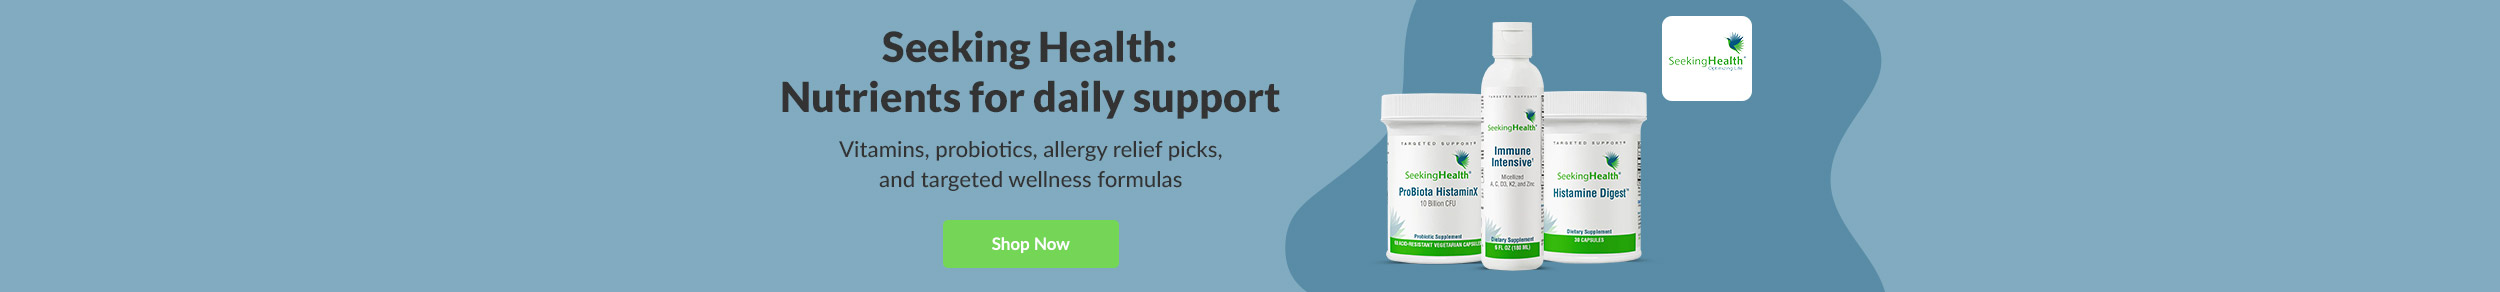 Seeking Health: Nutrients for daily support. Find high-quality vitamins, probiotics, allergy relief picks, and targeted wellness formulas. Shop Now!